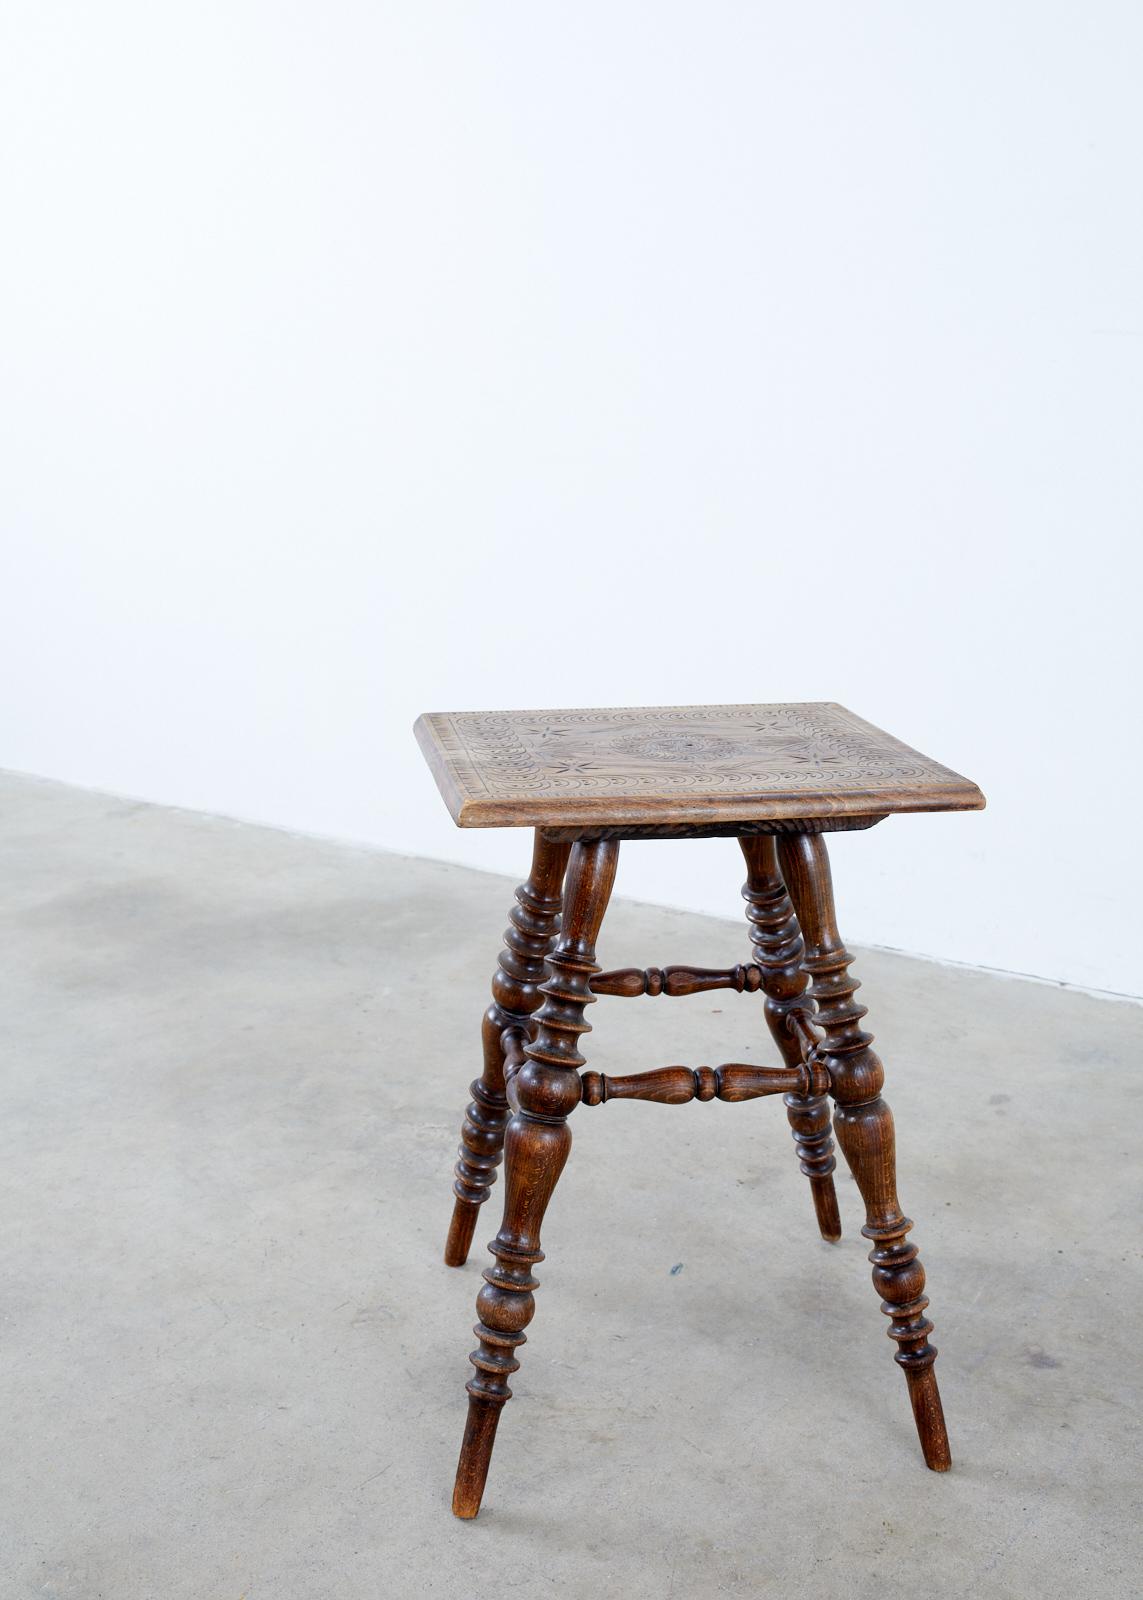 Rustic American Wooden Stool or Drinks Table 2